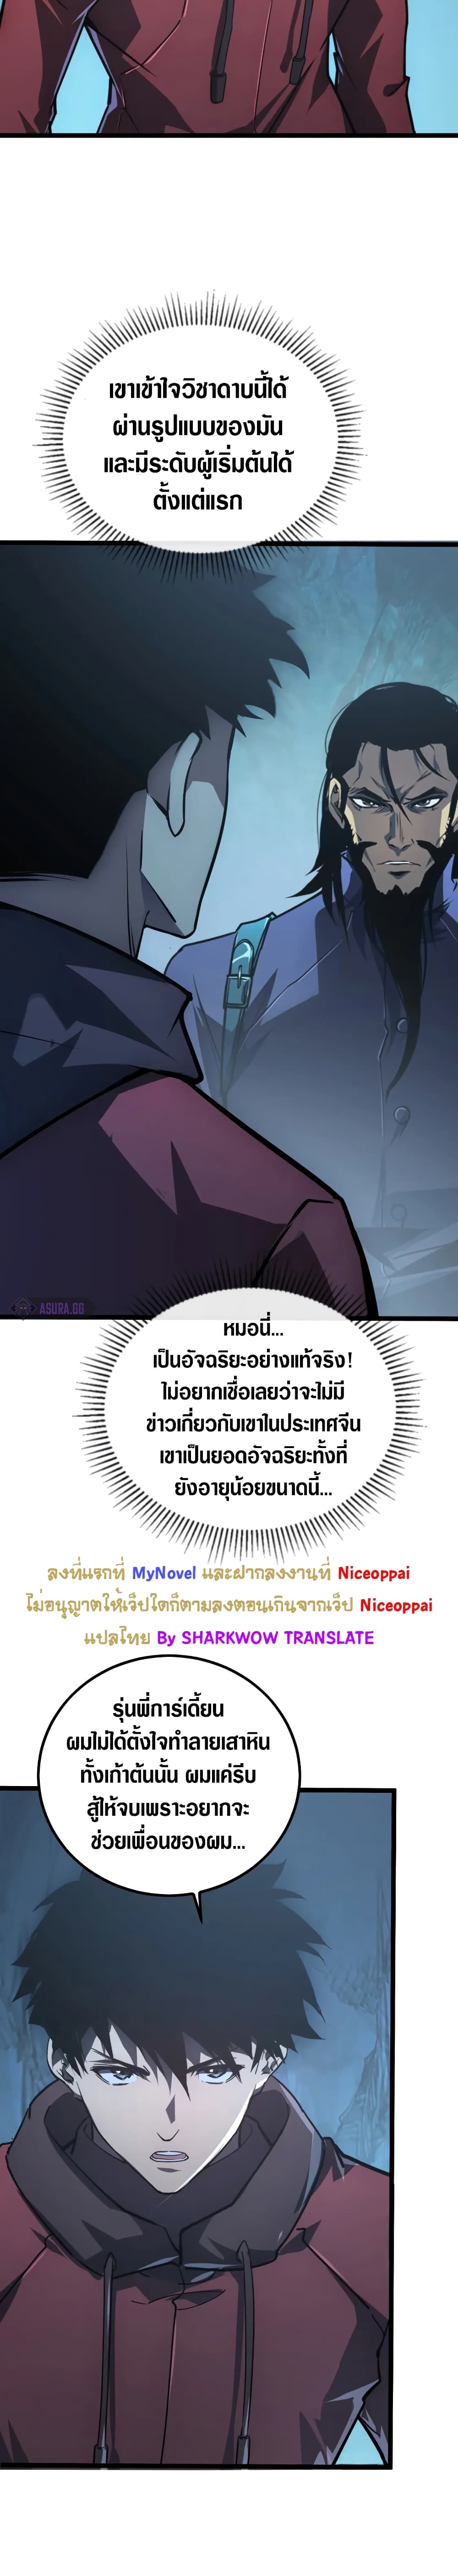 Rise From The Rubble เศษซากวันสิ้นโลก 139-139